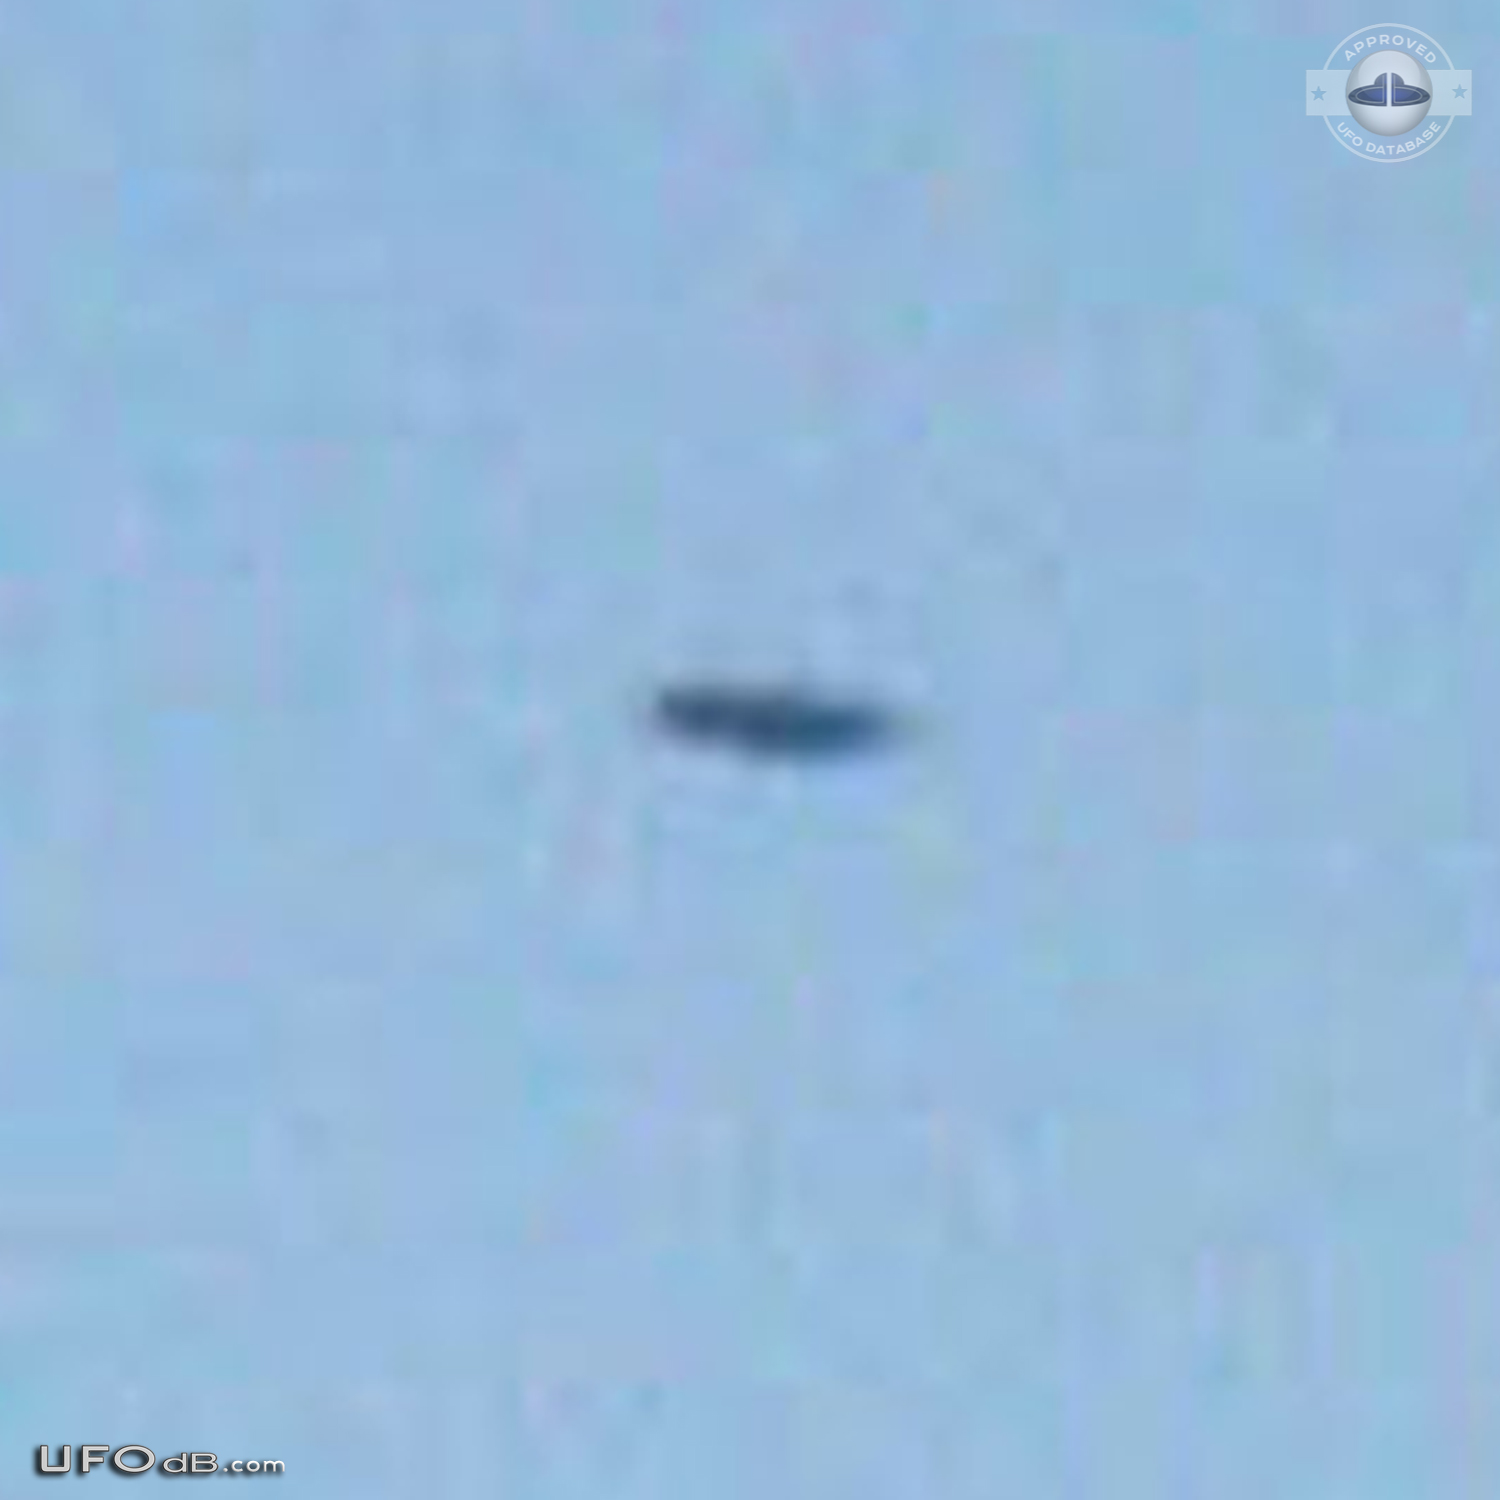 Silver saucer UFO caught on picture in Clarksville Tennessee USA 2012 UFO Picture #473-3